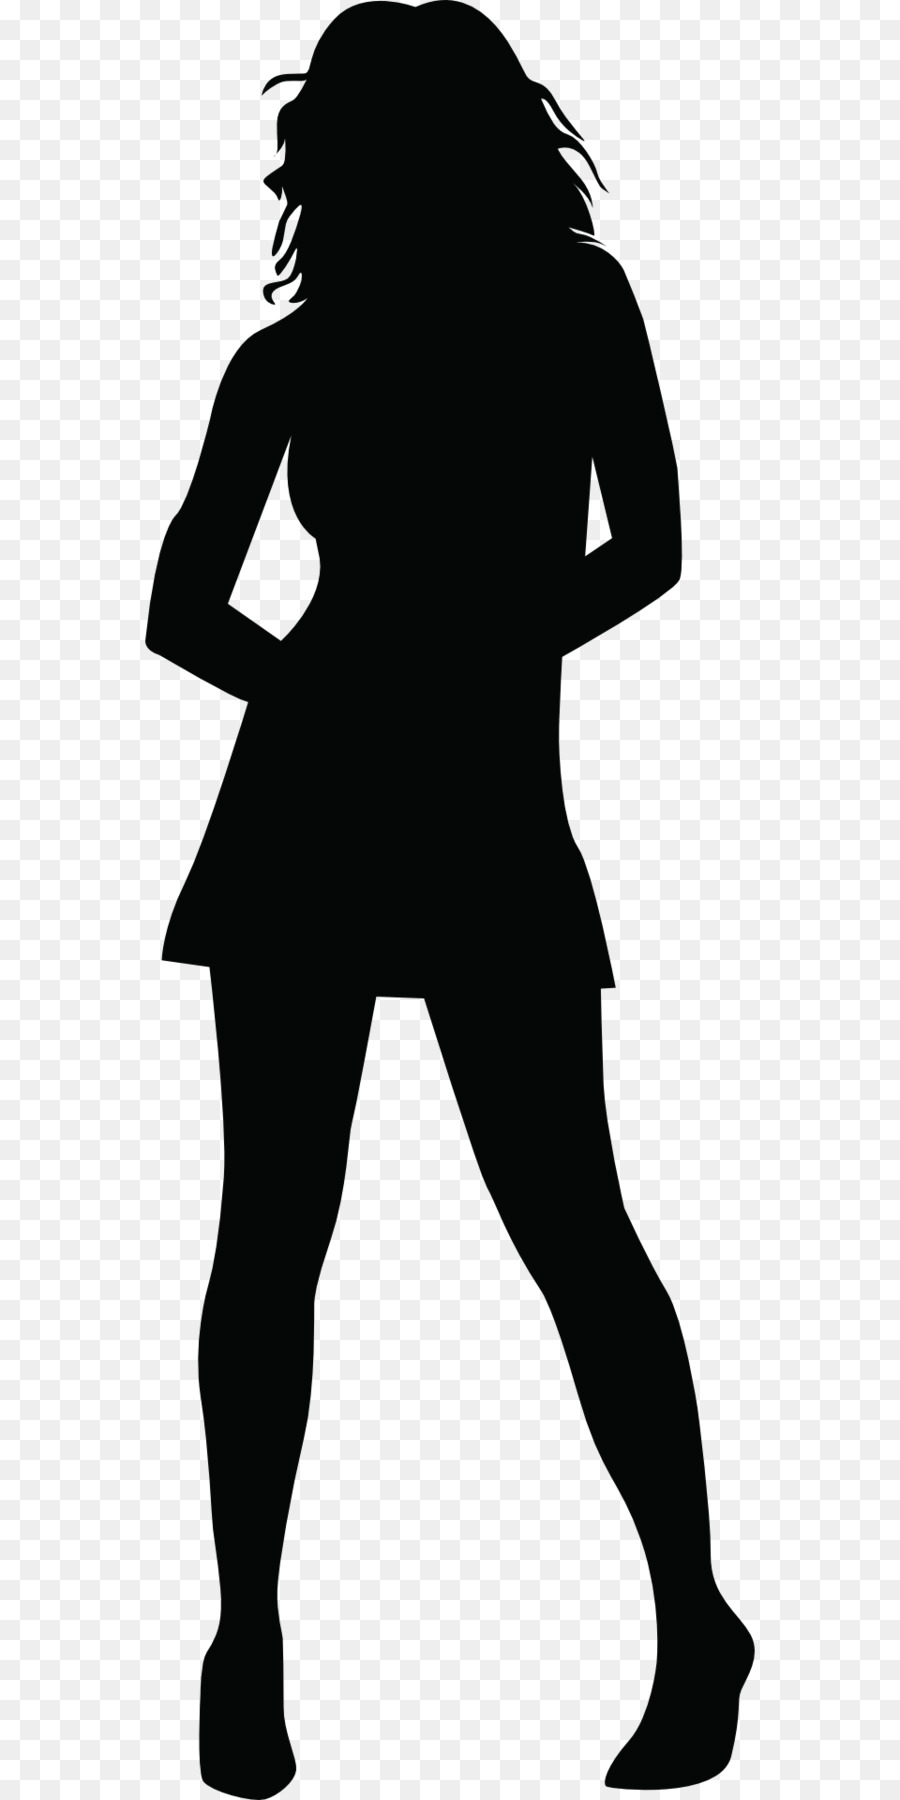 Woman Silhouette Sitting Clip art - woman silhouette png download - 986